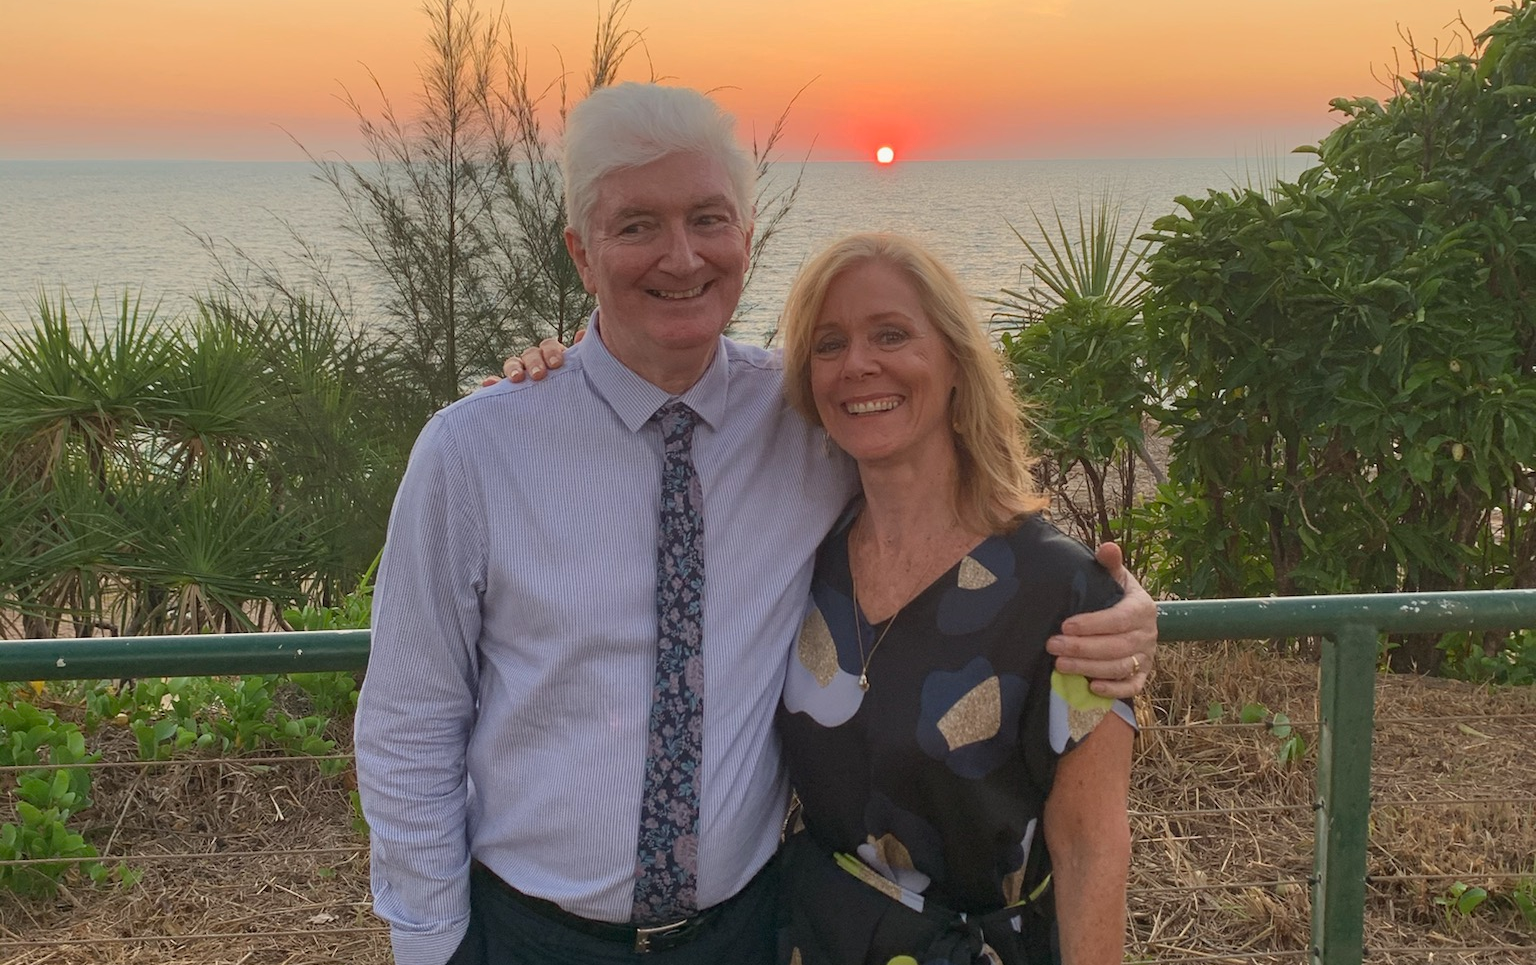 Sean and Jo Byrne standing in front of a sunset